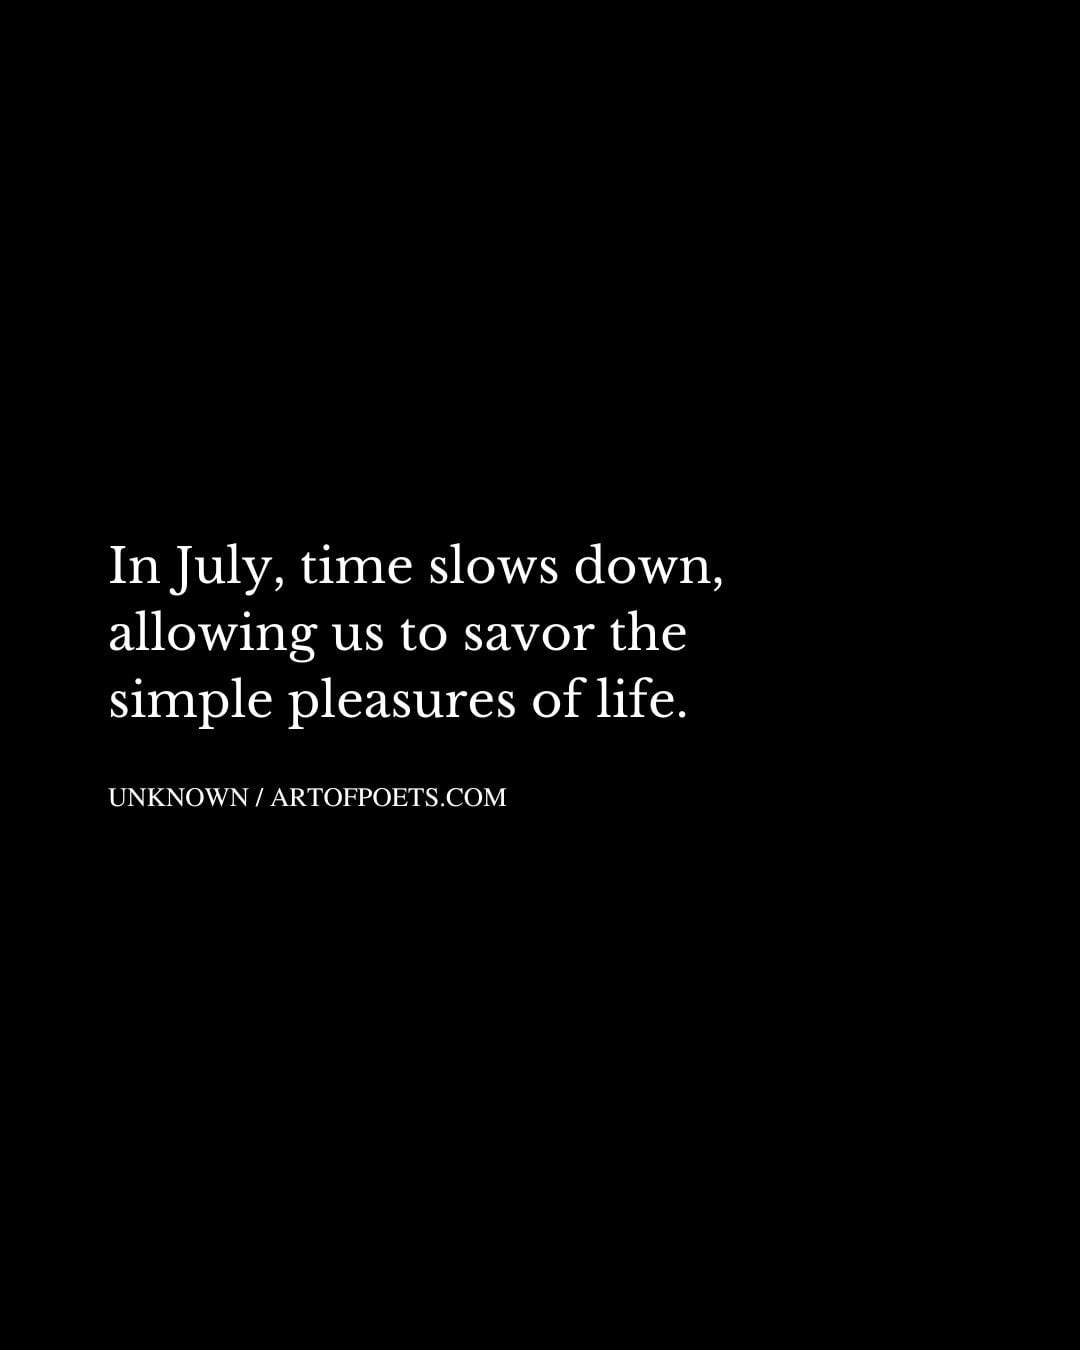 In July time slows down allowing us to savor the simple pleasures of life